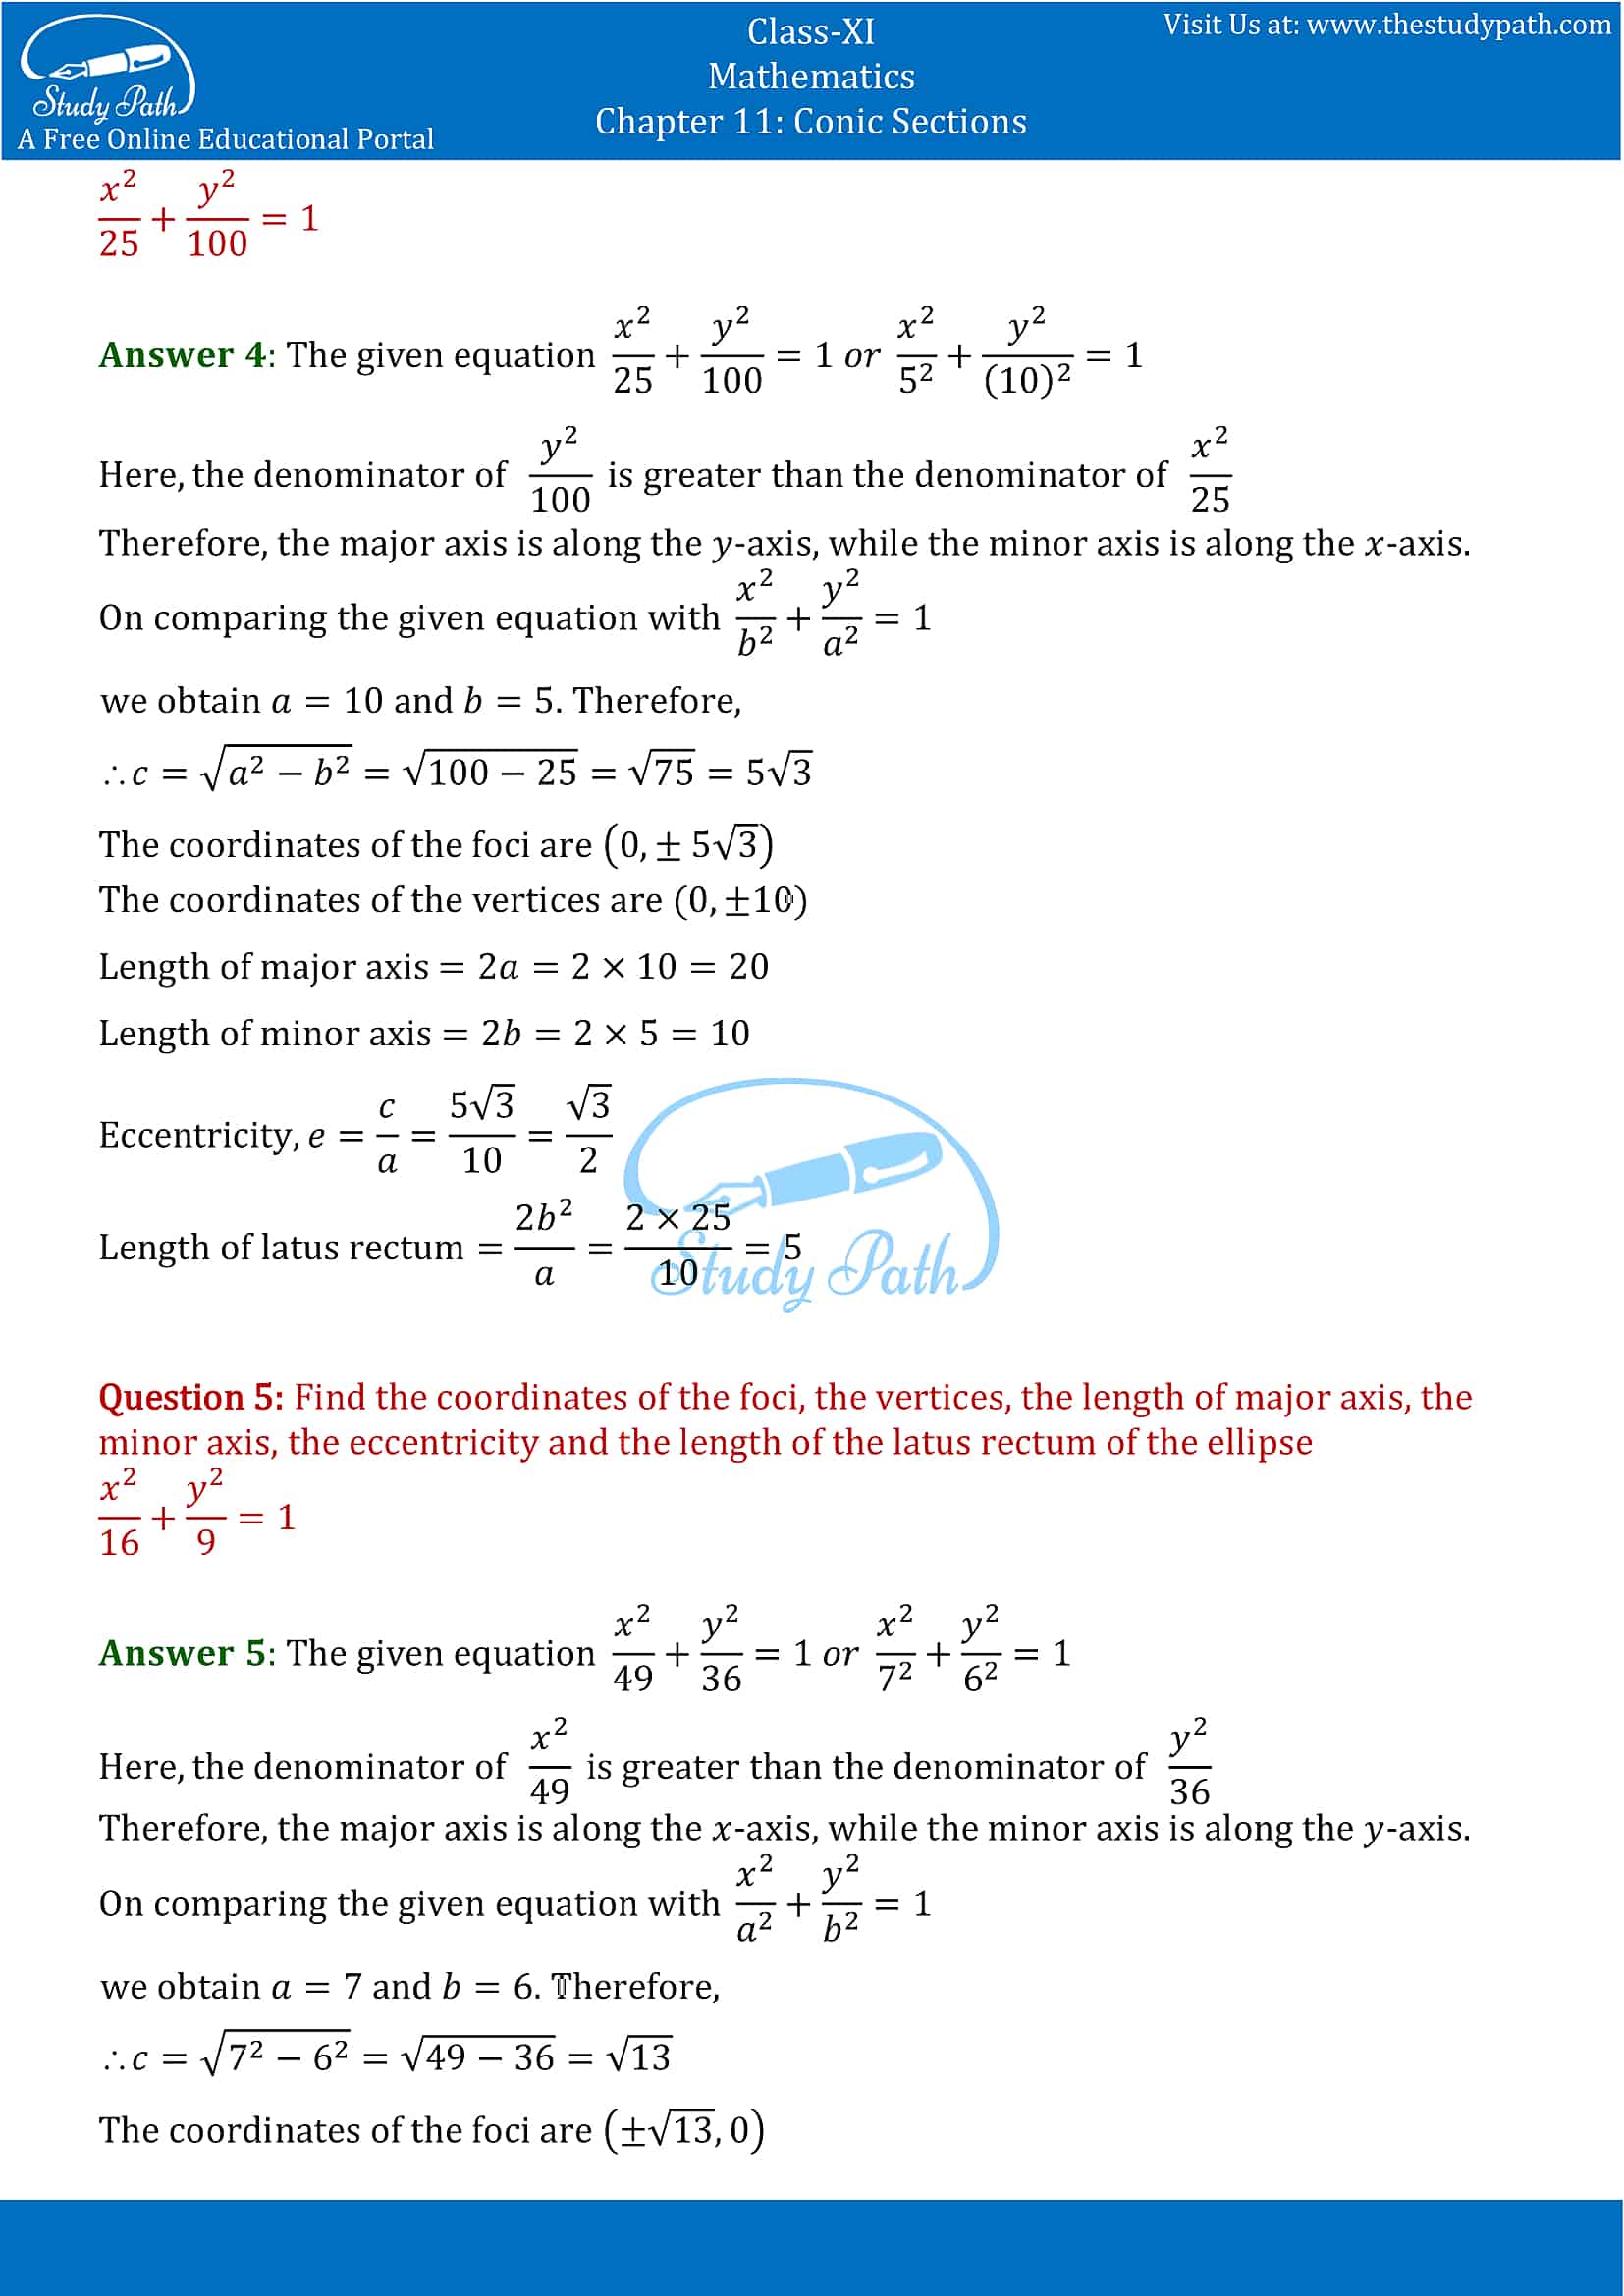 NCERT Solutions for Class 11 Maths chapter 11 Conic Section Exercise 11.3 Part-3